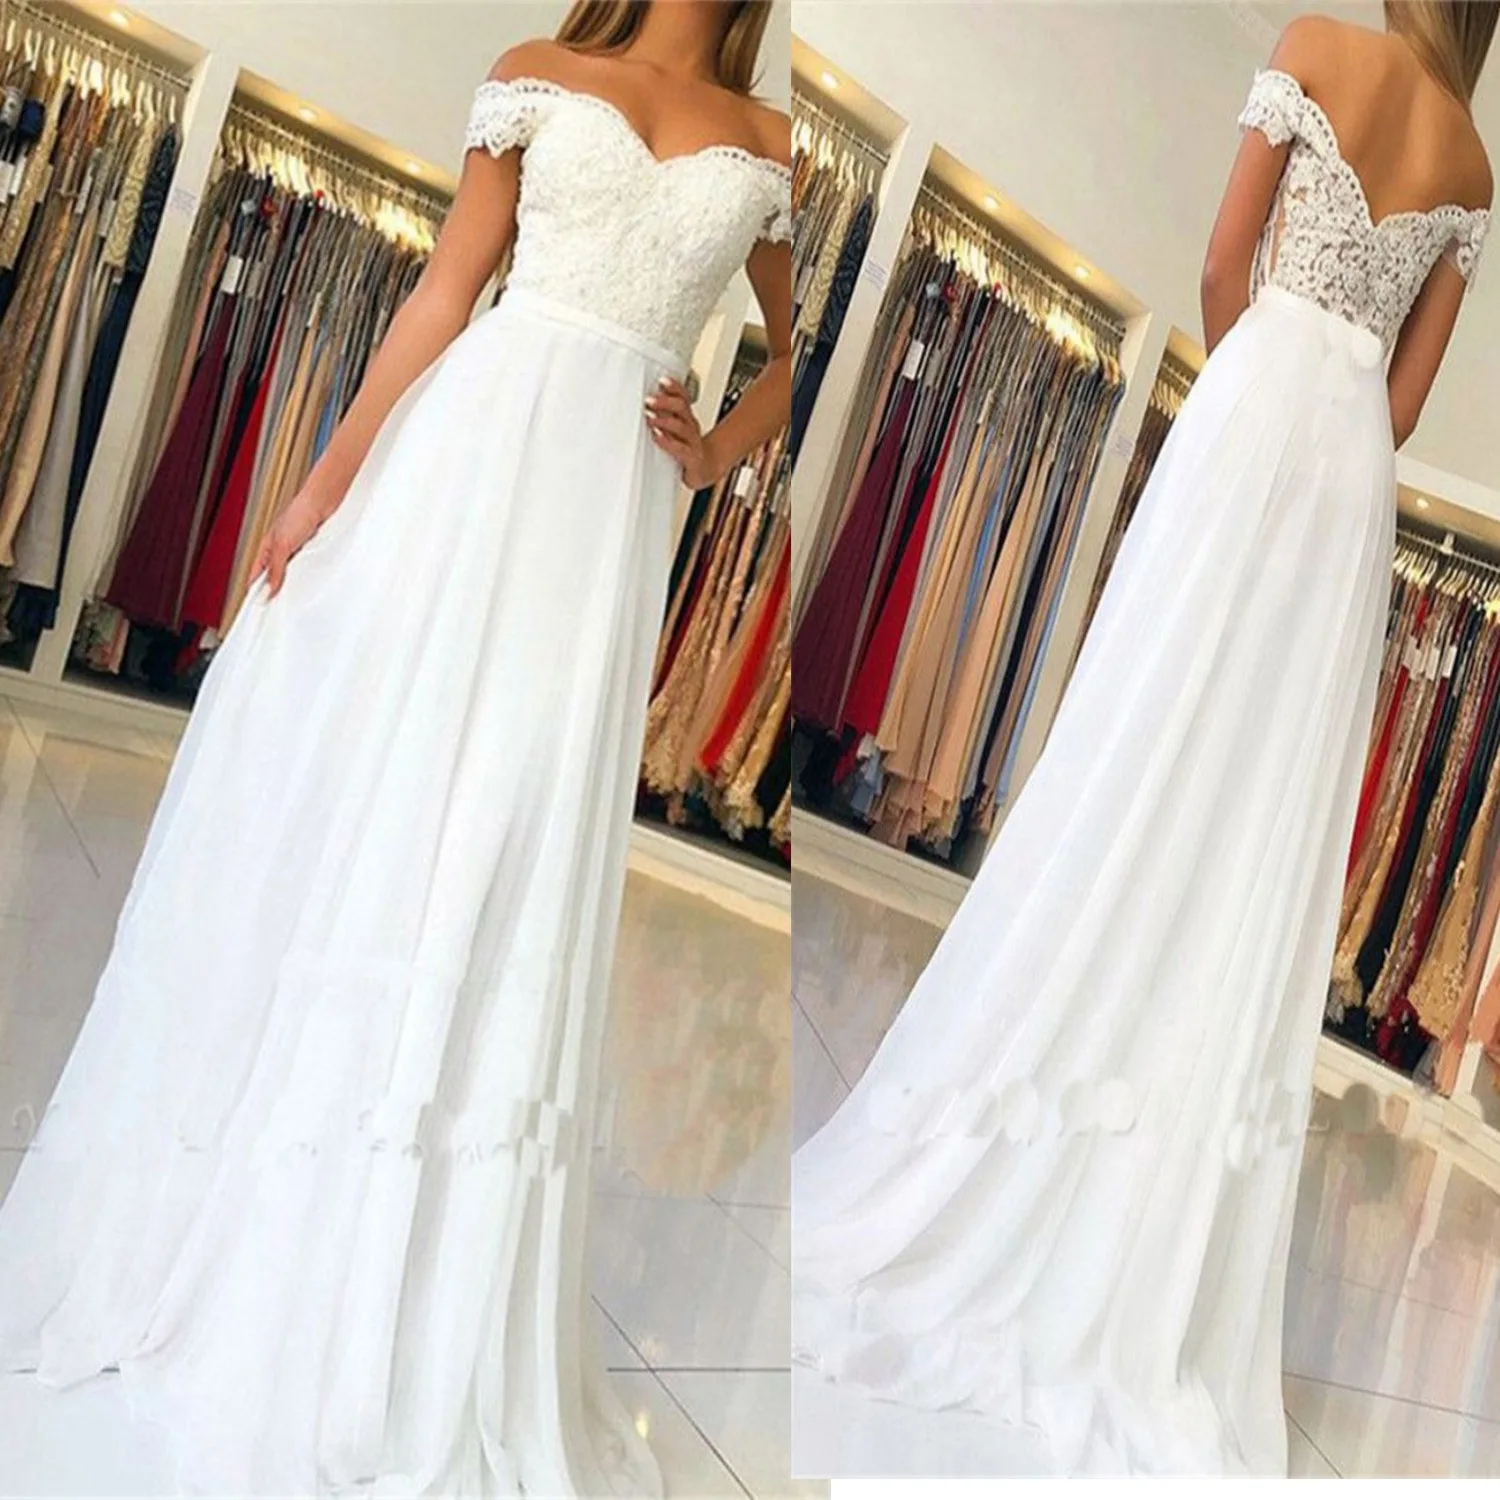 2023-off-the-shoulder-lace-prom-dress-sleeveless-backless-white-wedding-party-robe-classic-women-formal-dress-evening-gowns